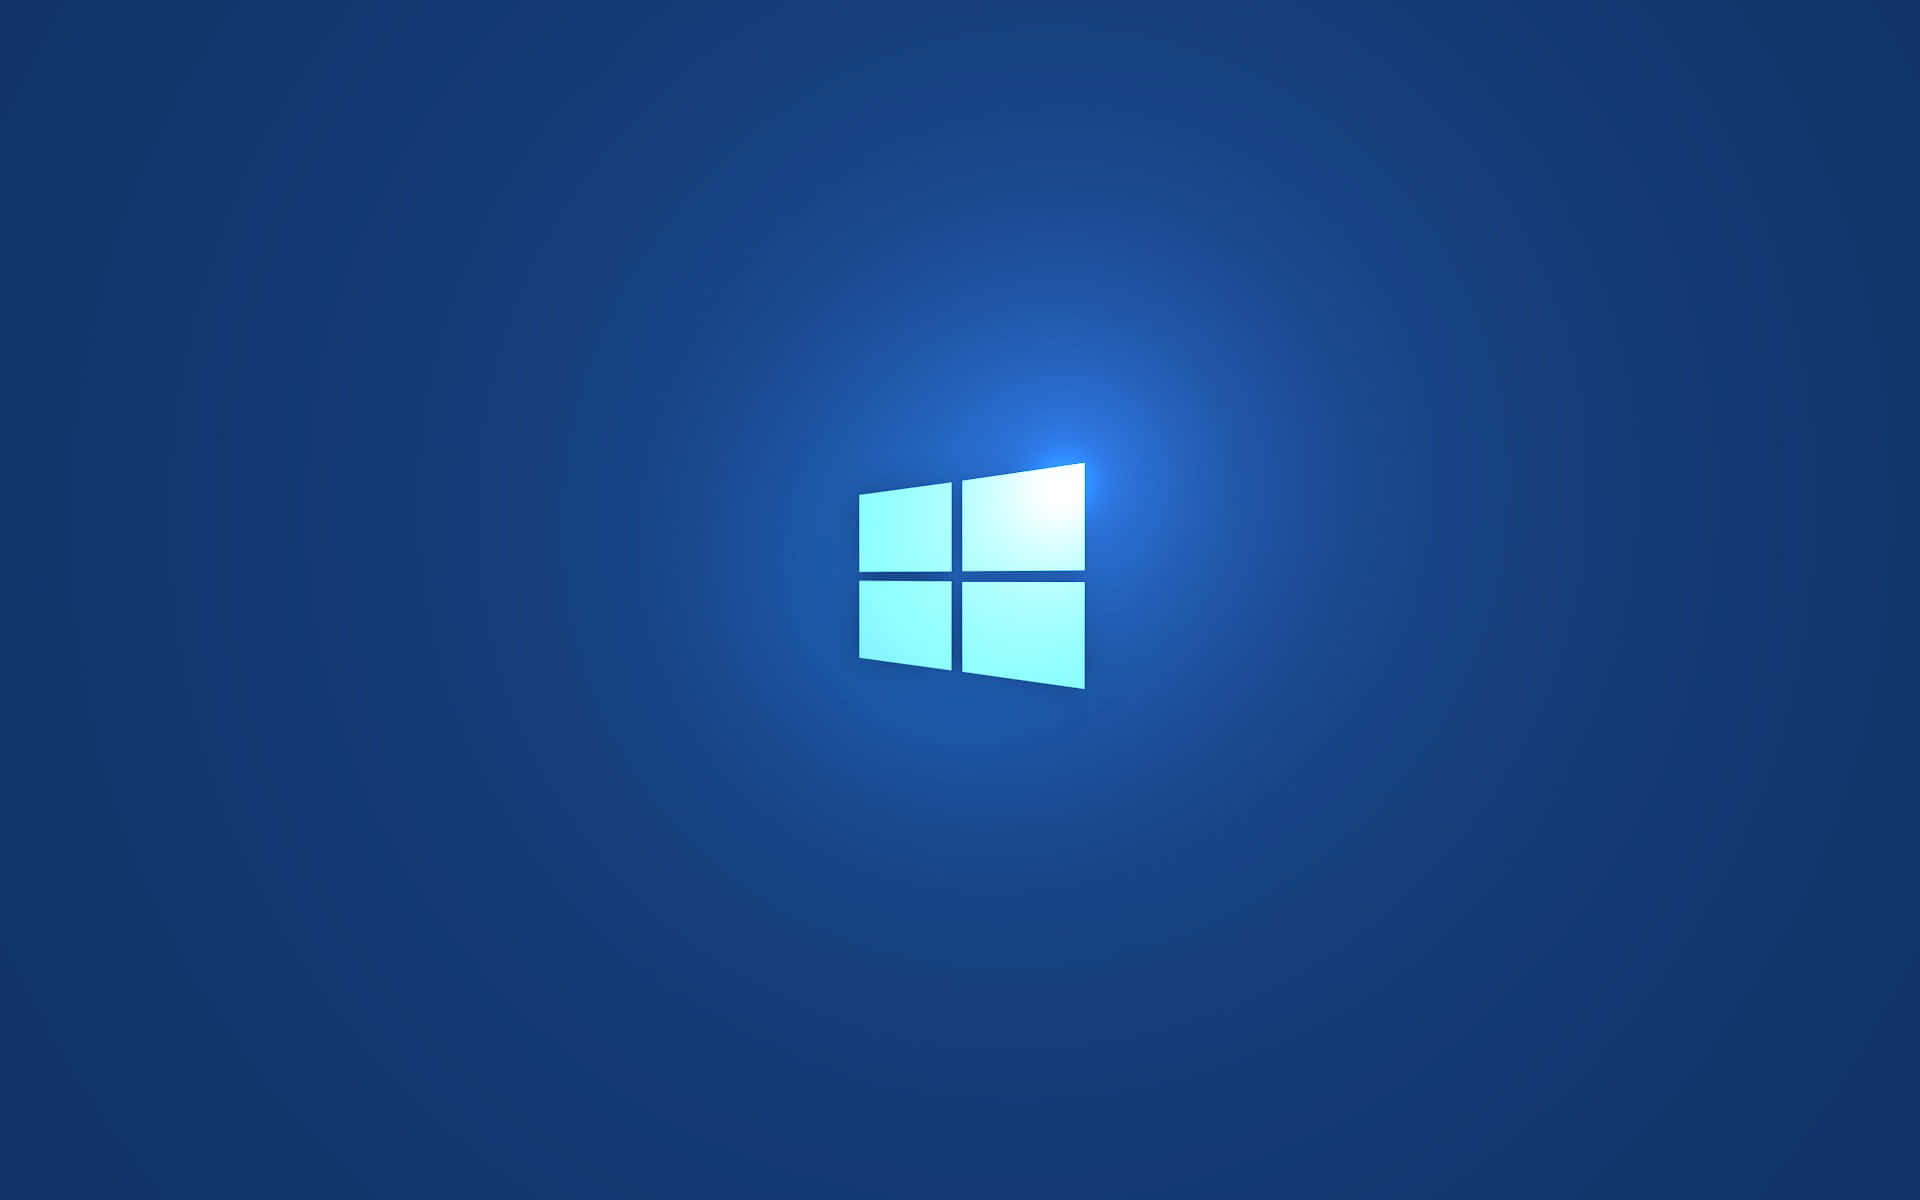 Enjoy The Simplicity And Performance Of Windows 8.1